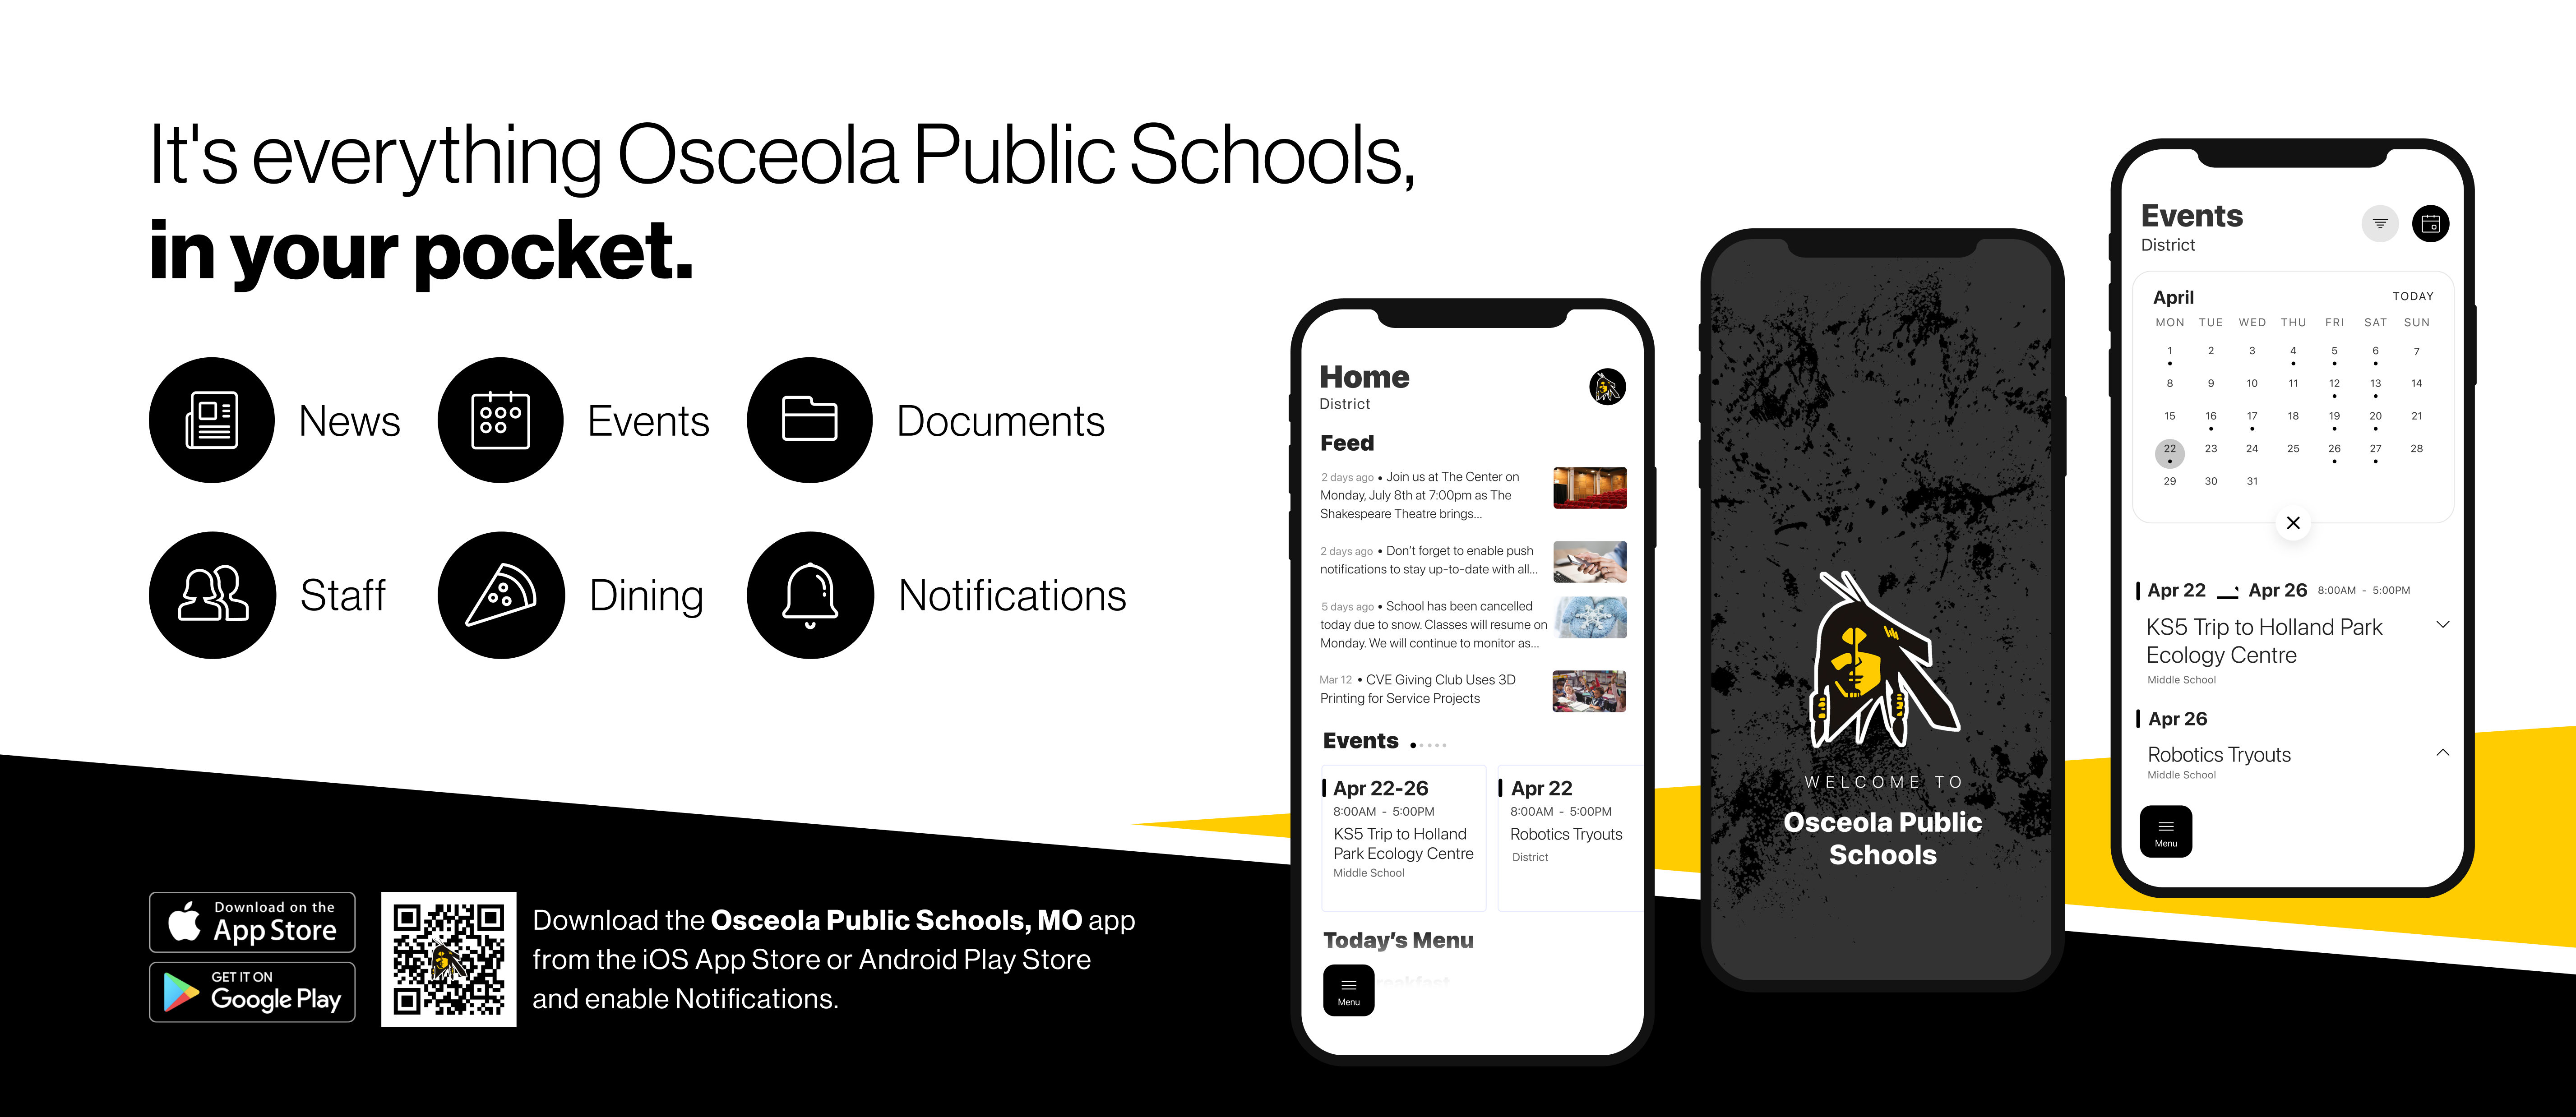 It’s everything Osceola Public Schools, in your pocket.